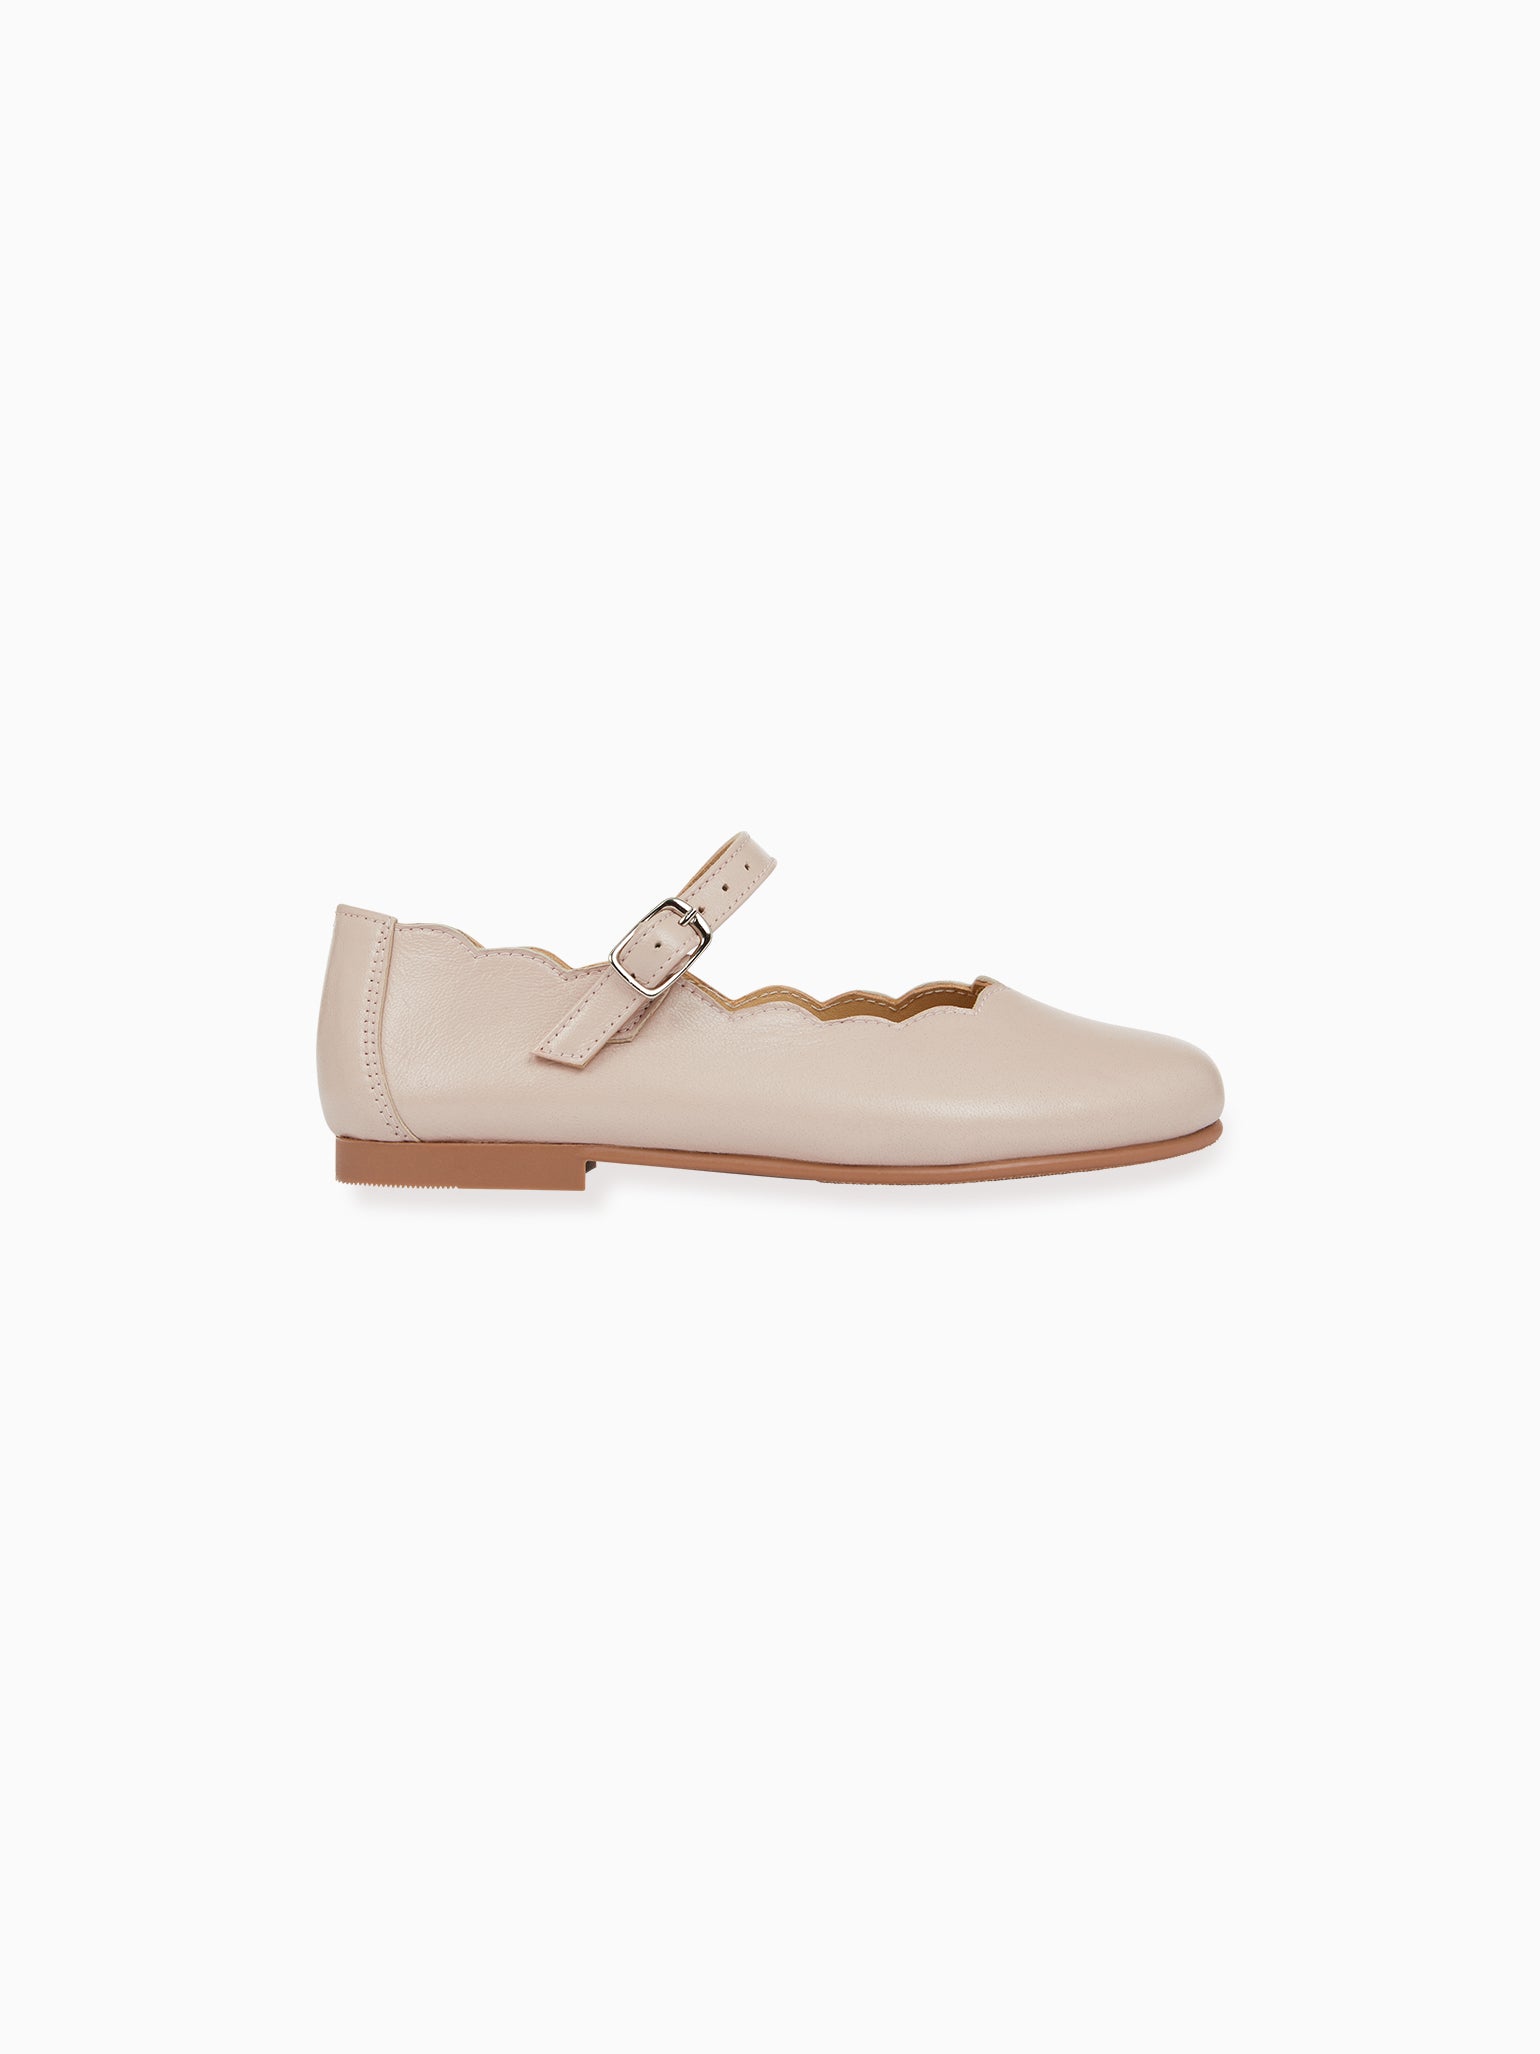 Blush Leather Girl Scallop Mary Jane Shoes